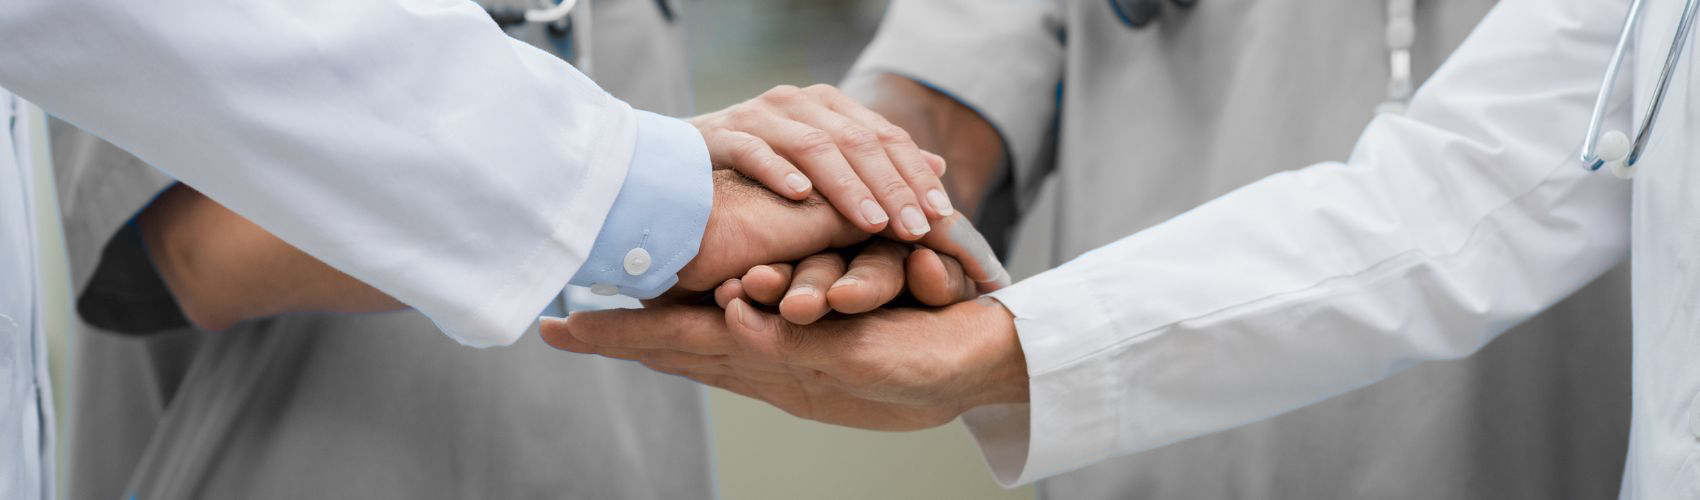 Close-up of medical professionals stacking hands in a gesture of teamwork and solidarity.